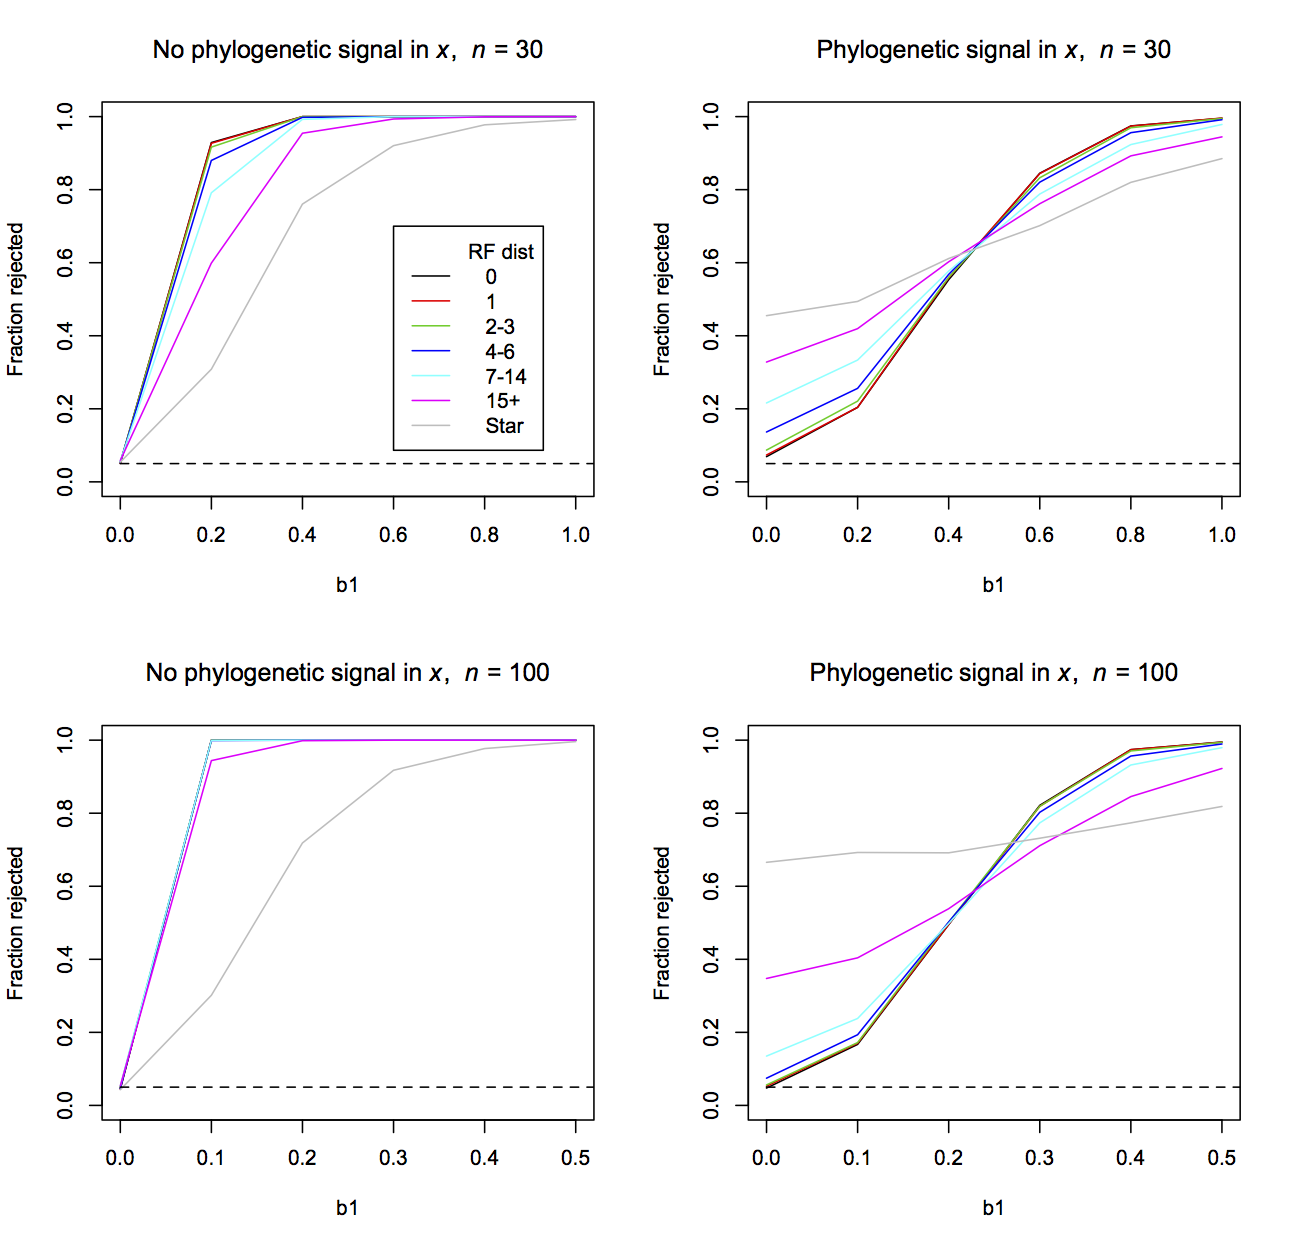 Fig. 3.10: Power curves for tests of the coefficient *b1* in a phylogenetic regression with permutations in the topology of the phylogenetic tree. Datasets of *n* = 30 and 100 species were simulated up a phylogenetic tree under Brownian motion evolution without (left panels) or with (right panels) phylogenetic signal in *x* given by Brownian motion evolution. The data were fit using the initial phylogeny (black lines). Permutations of the initial phylogeny were then generated and compared to the initial phylogeny using the RF distance. Single permutation trees were selected in the following bins: RF = 1, 2-3, 4-6, 7-14, and 15+. These permutation phylogenies were then used in fitting the model to the data, thereby mimicking mistakes in the phylogenetic of differing degrees depending on RF. Finally, the data were fit to a LM that assumes there is no phylogenetic signal in the residual errors (a star phylogeny). Two-thousand simulations were performed for each level of *b1* = 0, 0.2, 0.4, 0.6, 0.8 and 1.0, and the rejection rates were calculated with `phylolm()` (Pagel's λ model) using a Wald test.